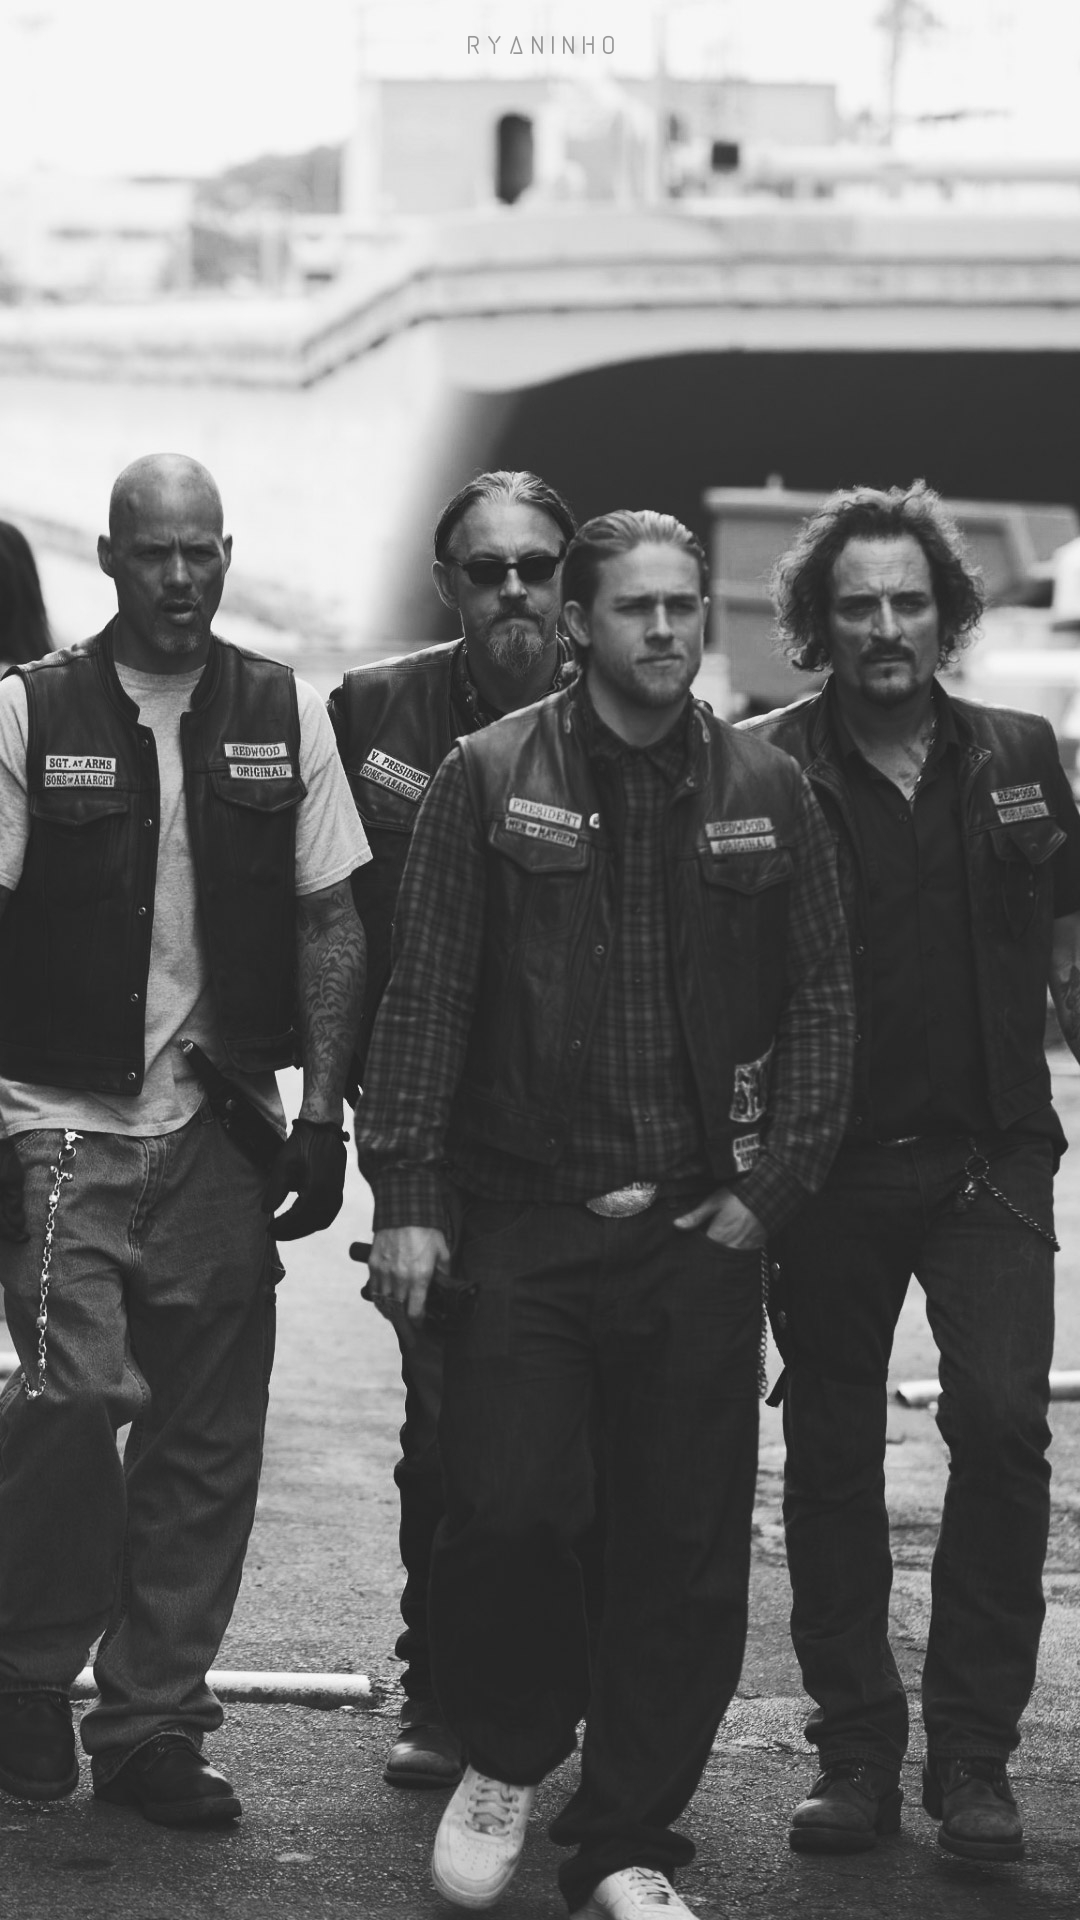 Sons of anarchy. Wallpaper